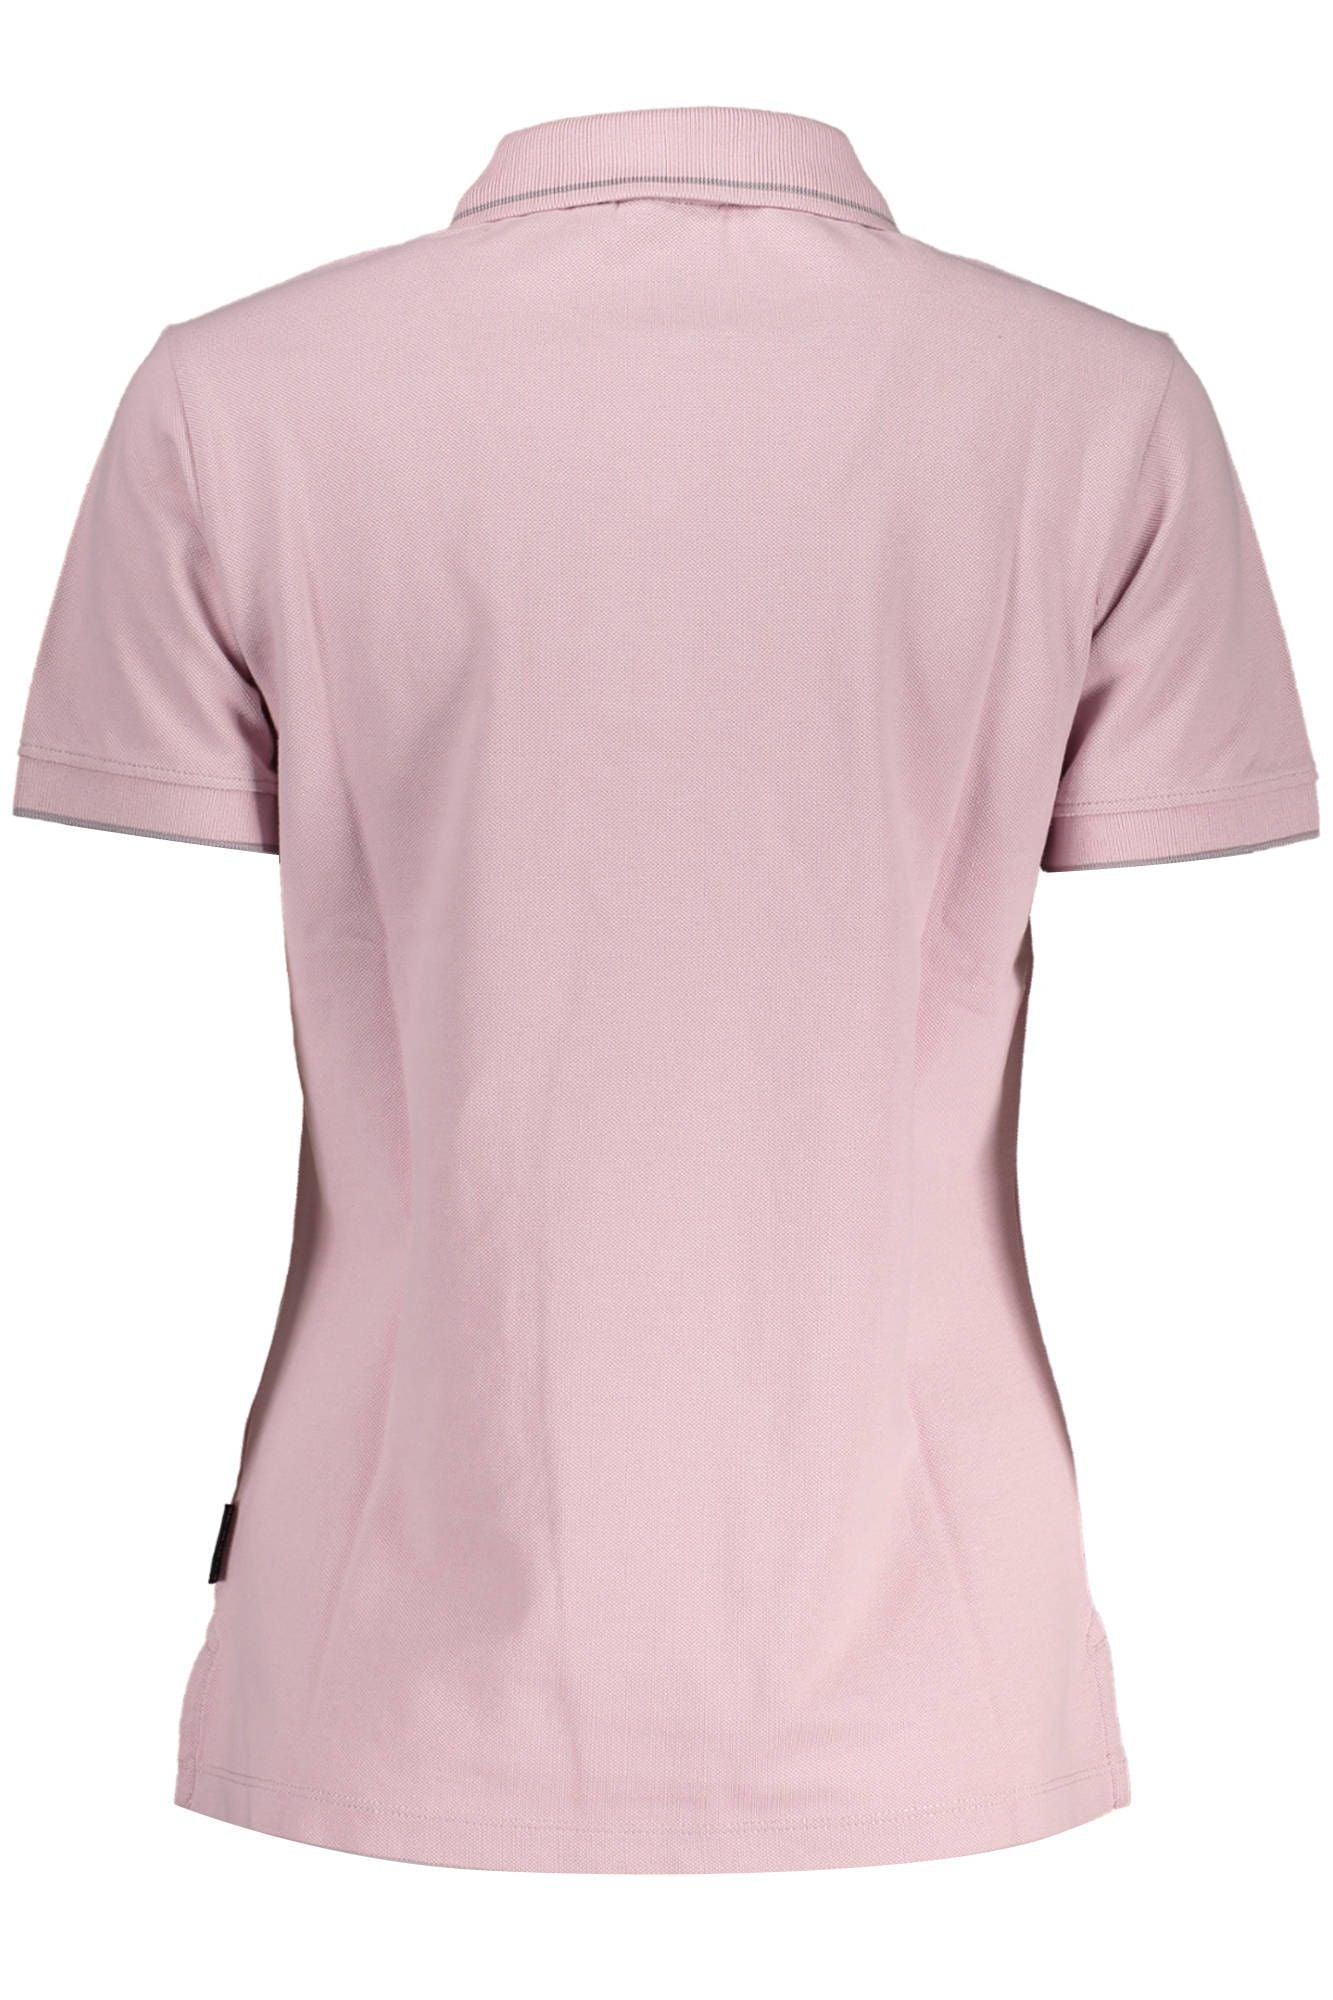 Napapijri Chic Pink Polo with Contrasting Details - PER.FASHION